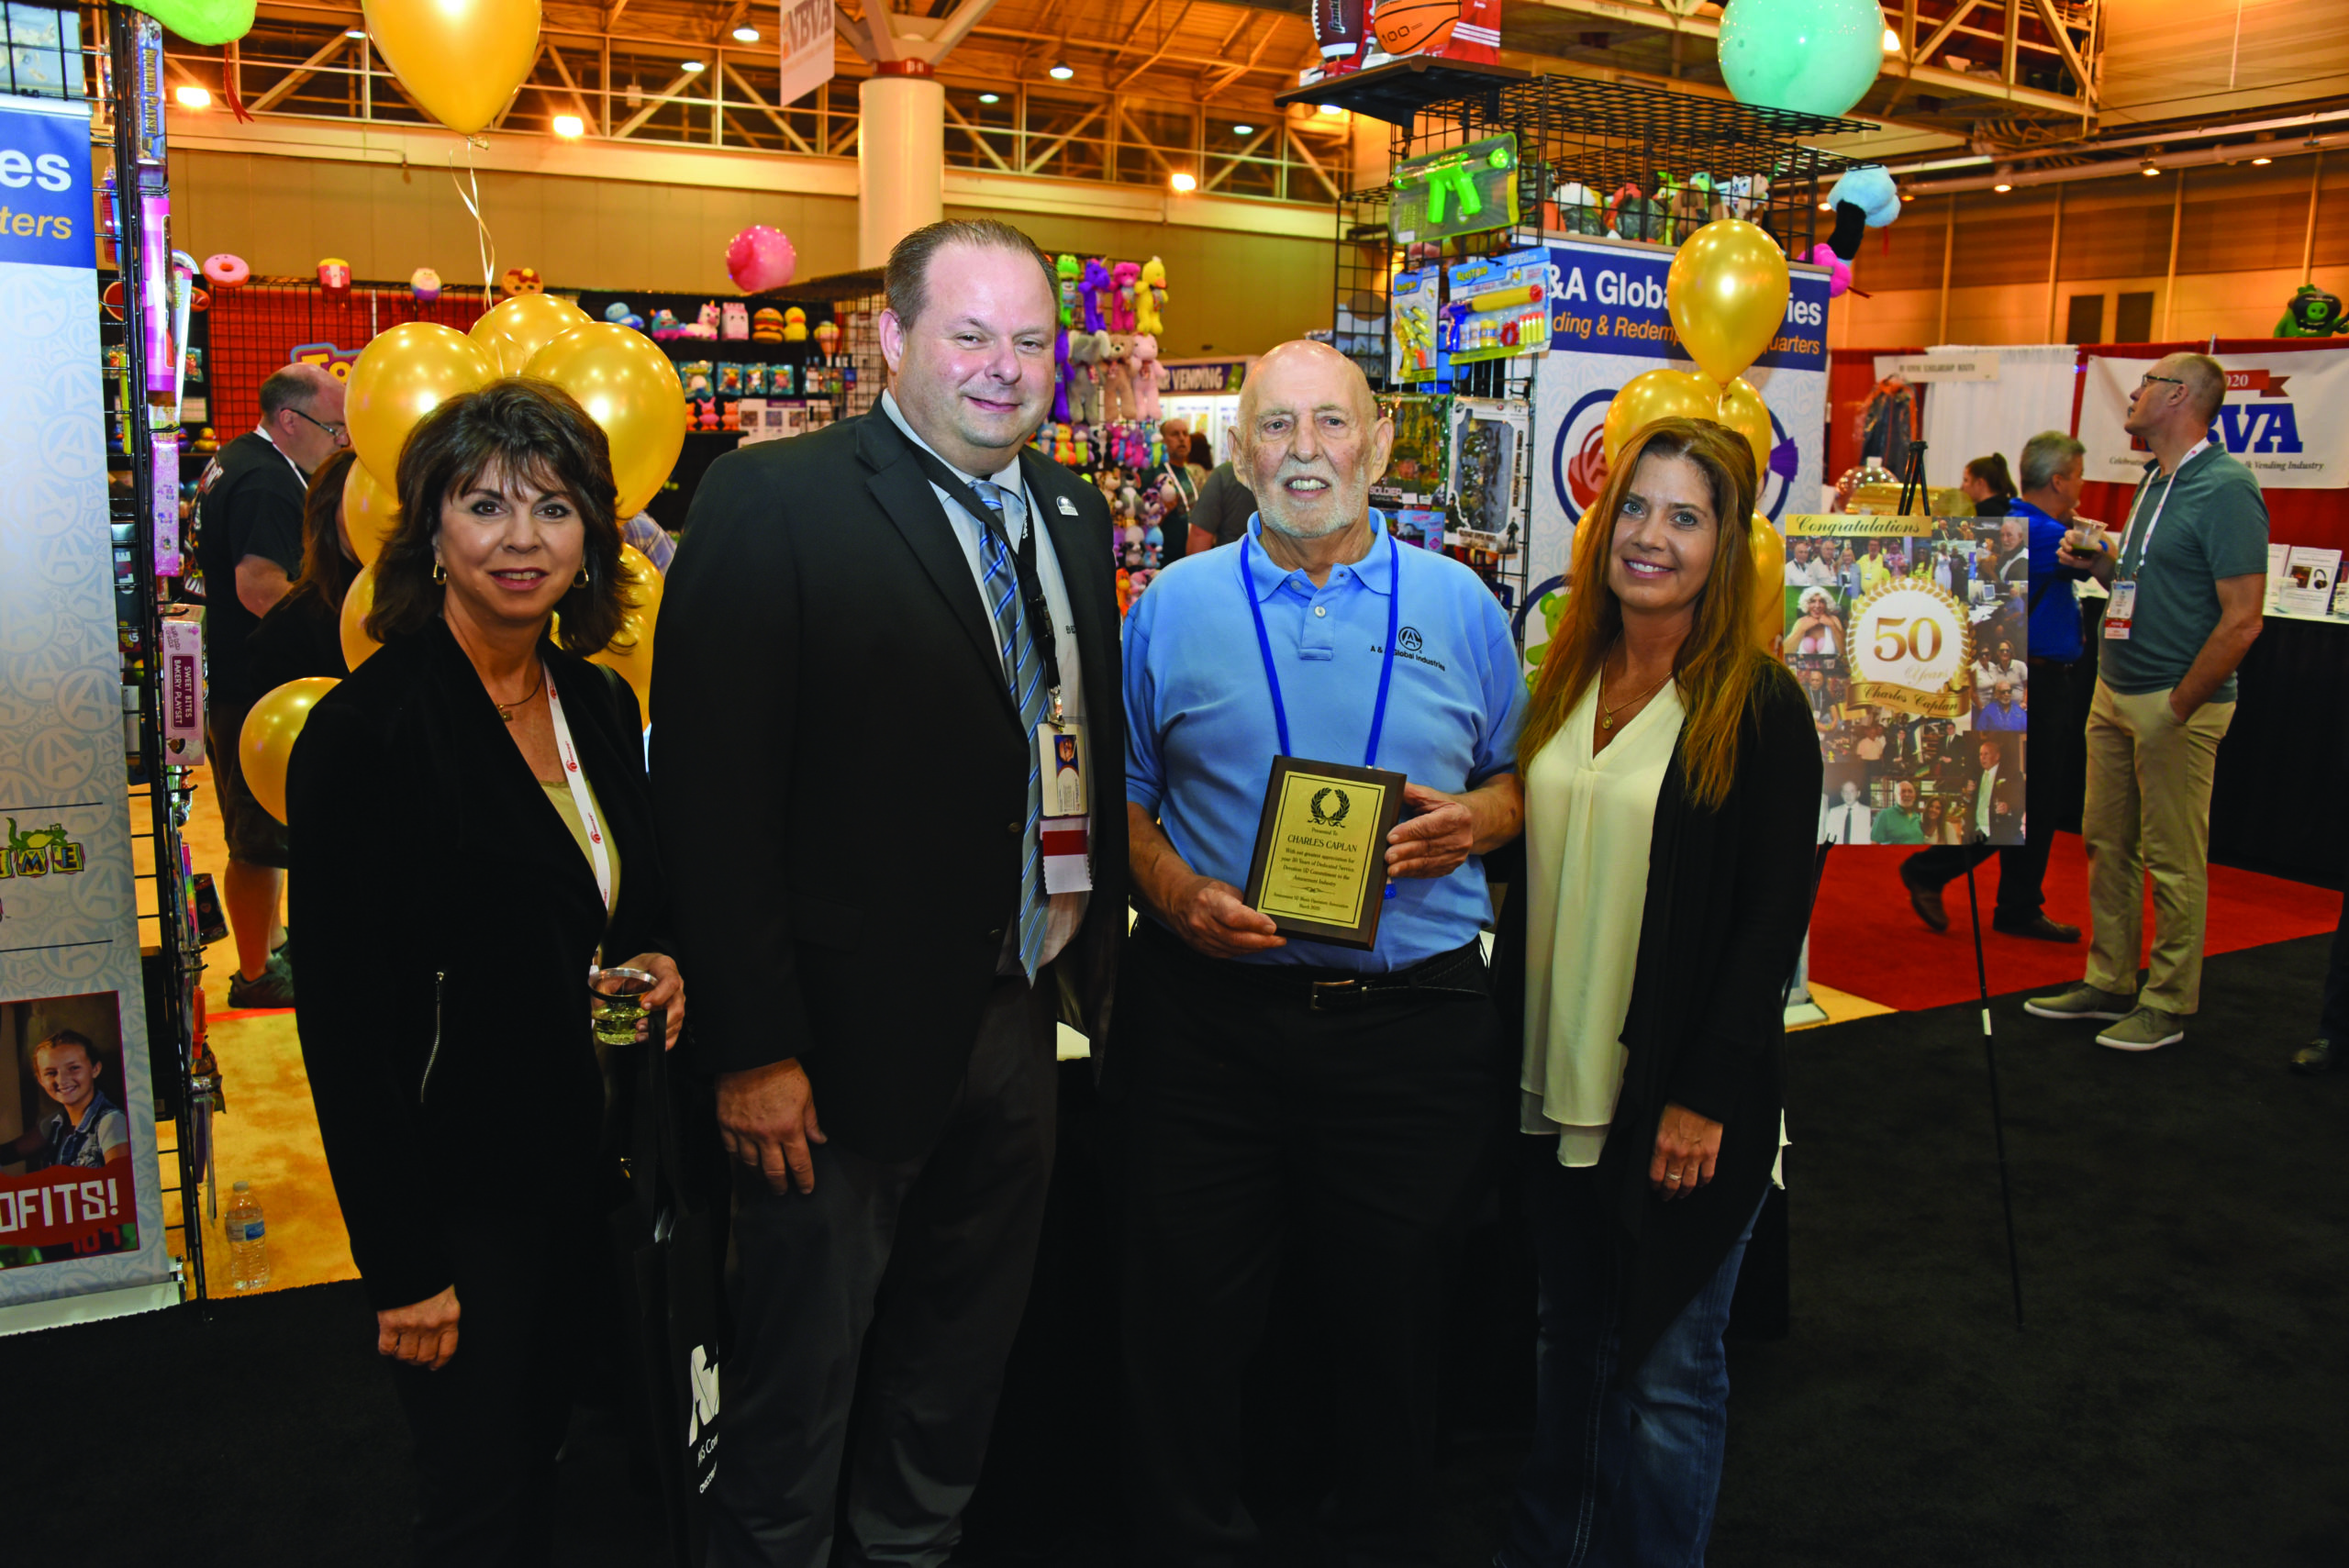 Honored at Expo - Obituary Charles Caplan